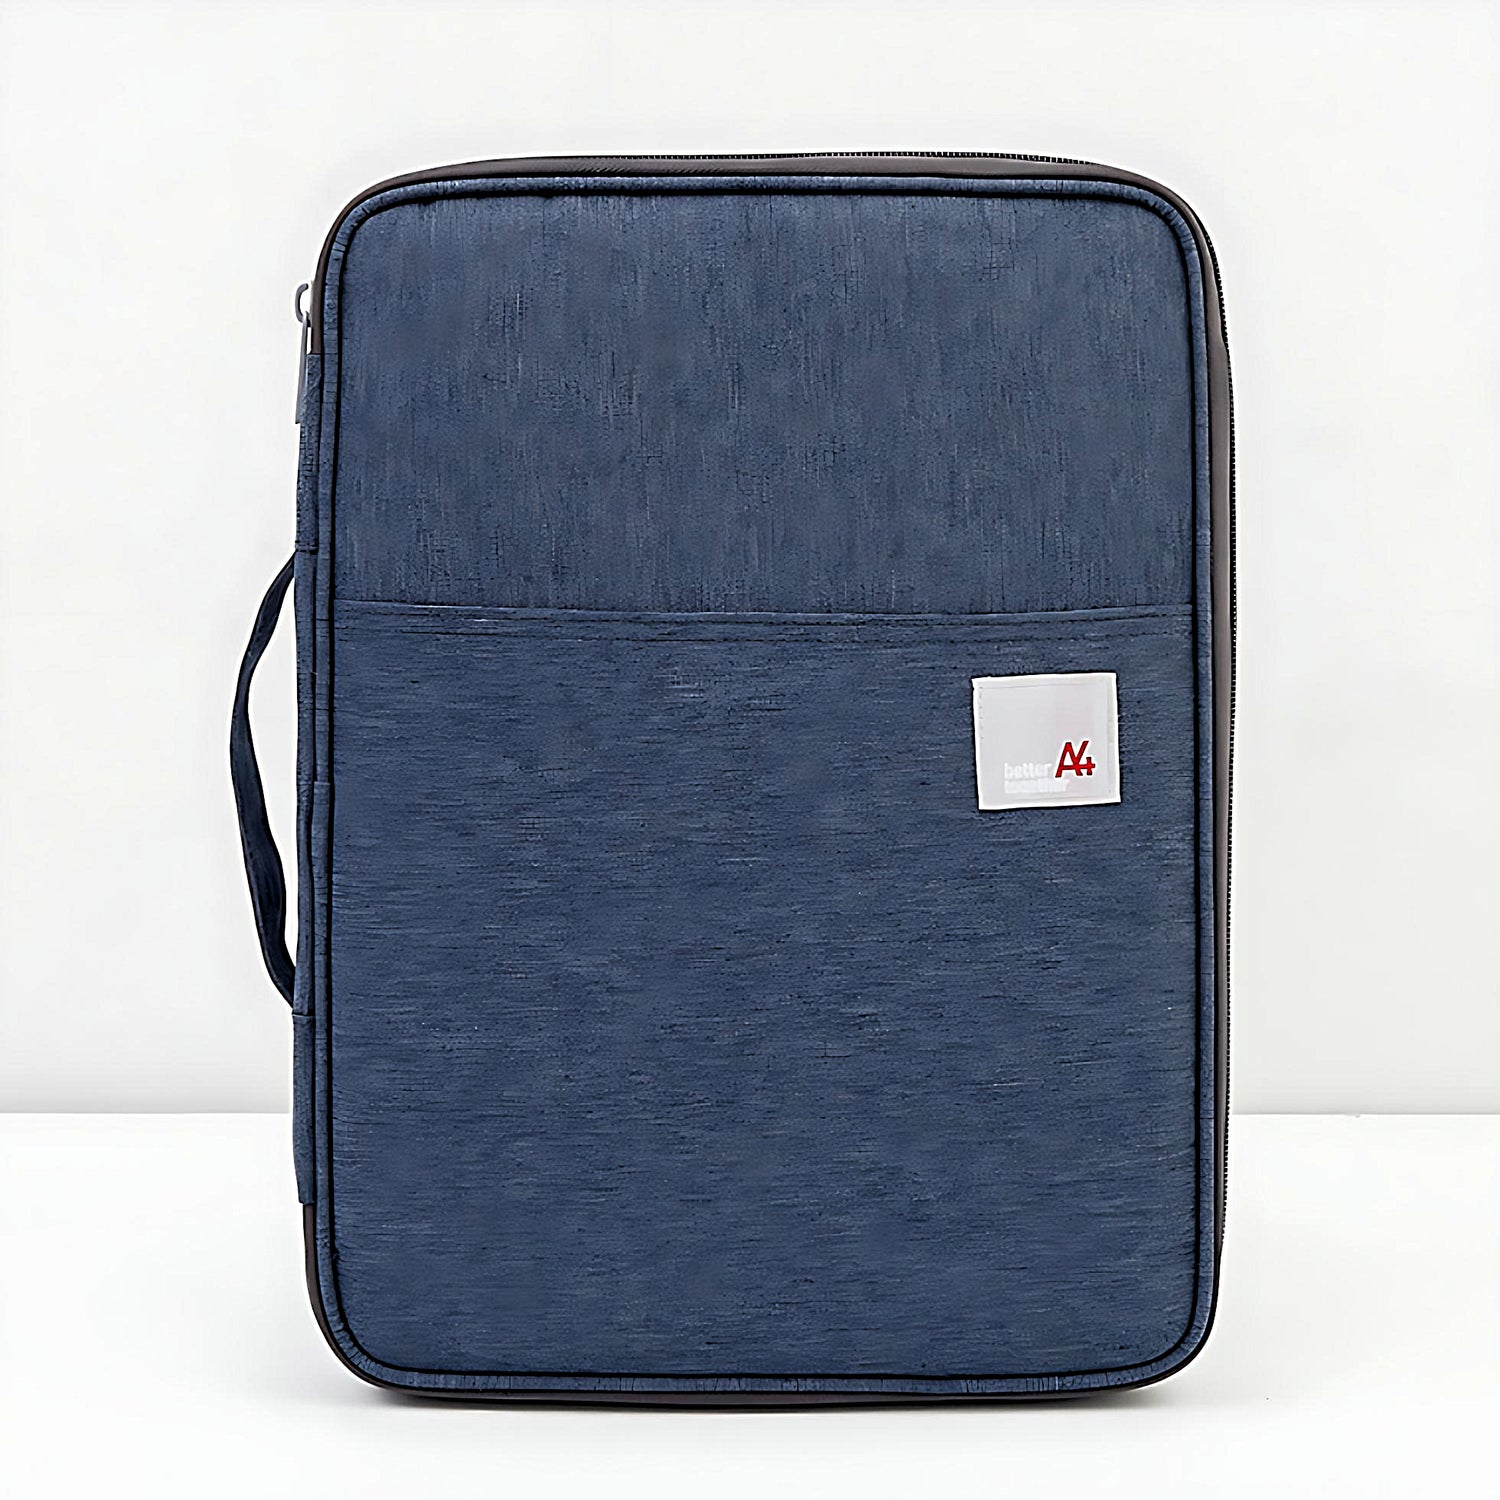 a laptop briefcase in dark blue color on a white background